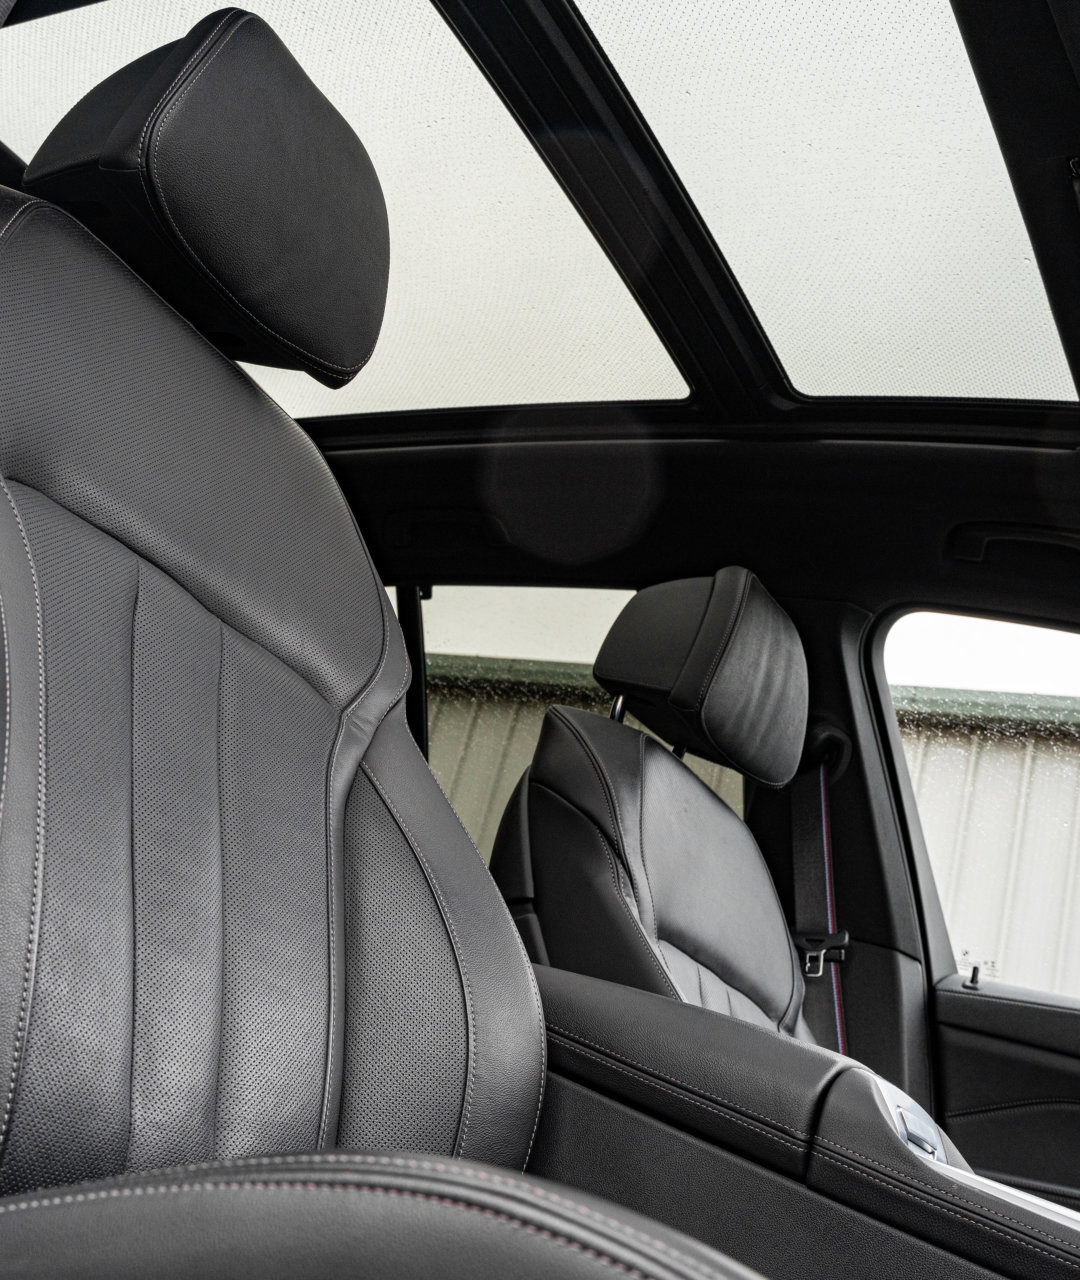 2019 BMW X5 40d M Sport driver side seating panoramic sunroof